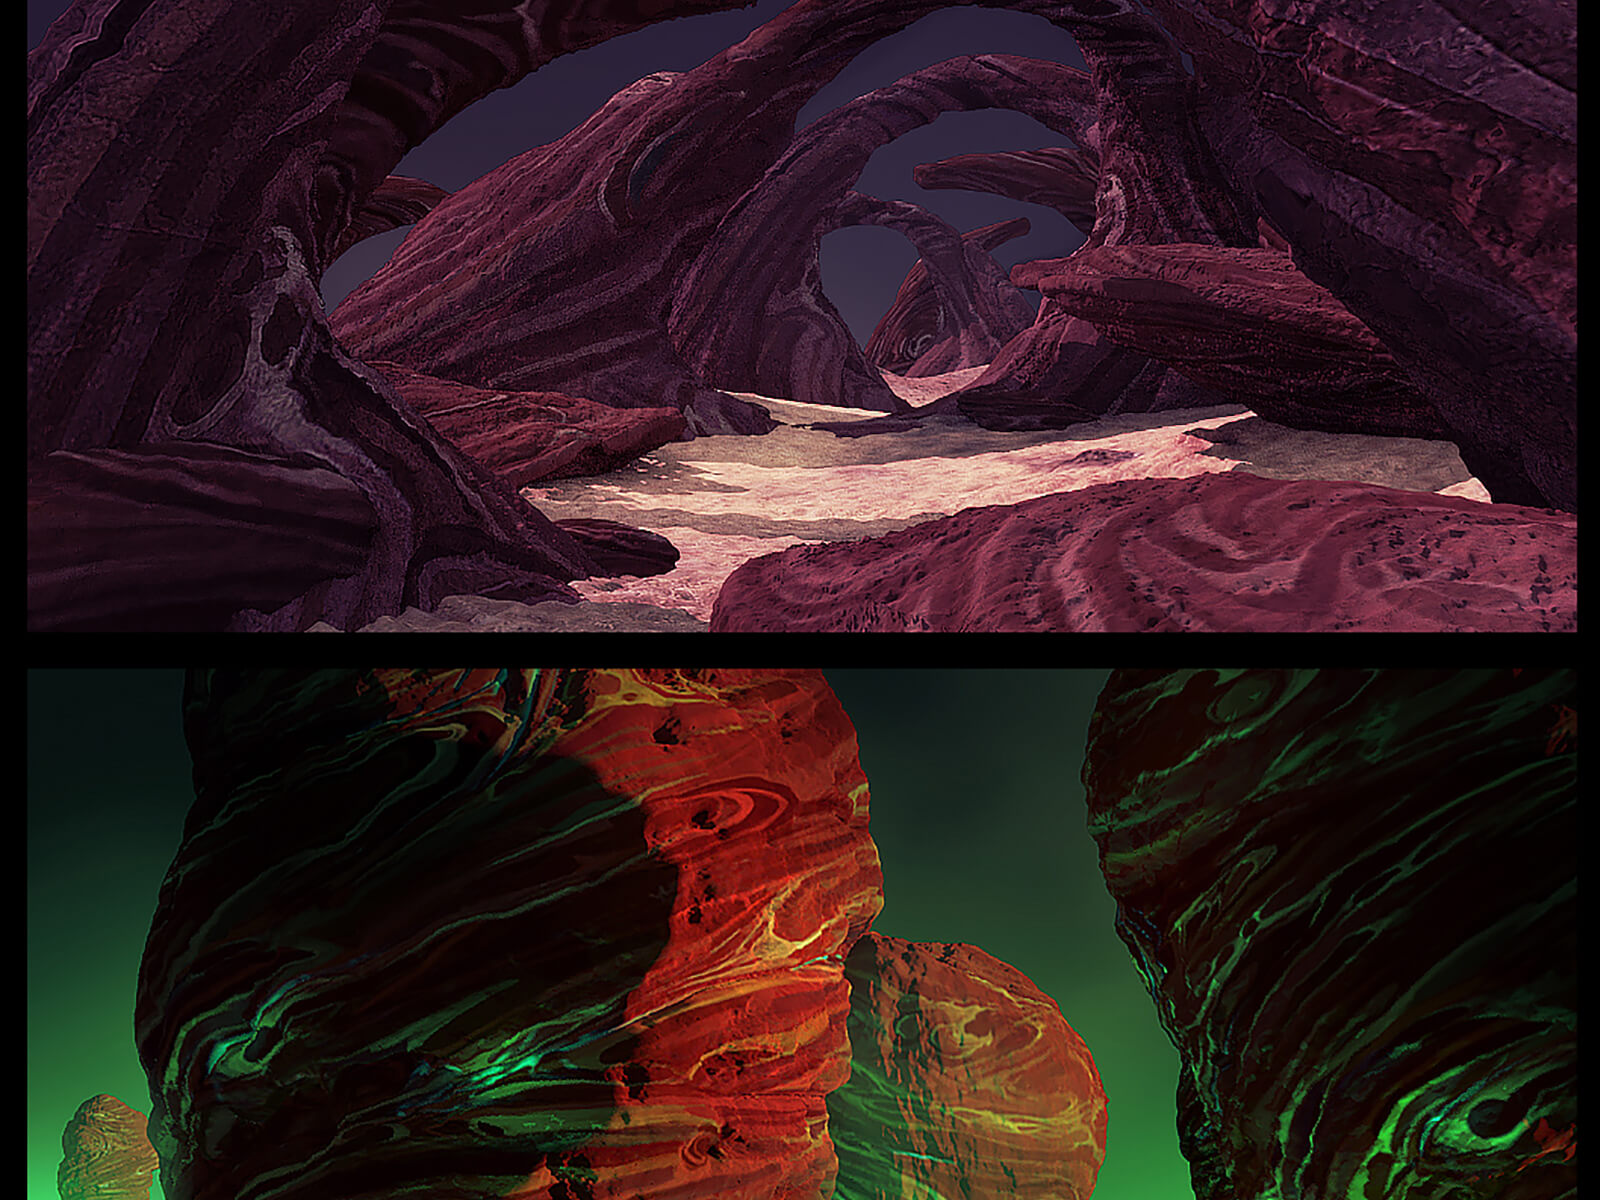 Two alien desert landscapes, one depicting mysterious rocky arches, the other colorful stone outcroppings.